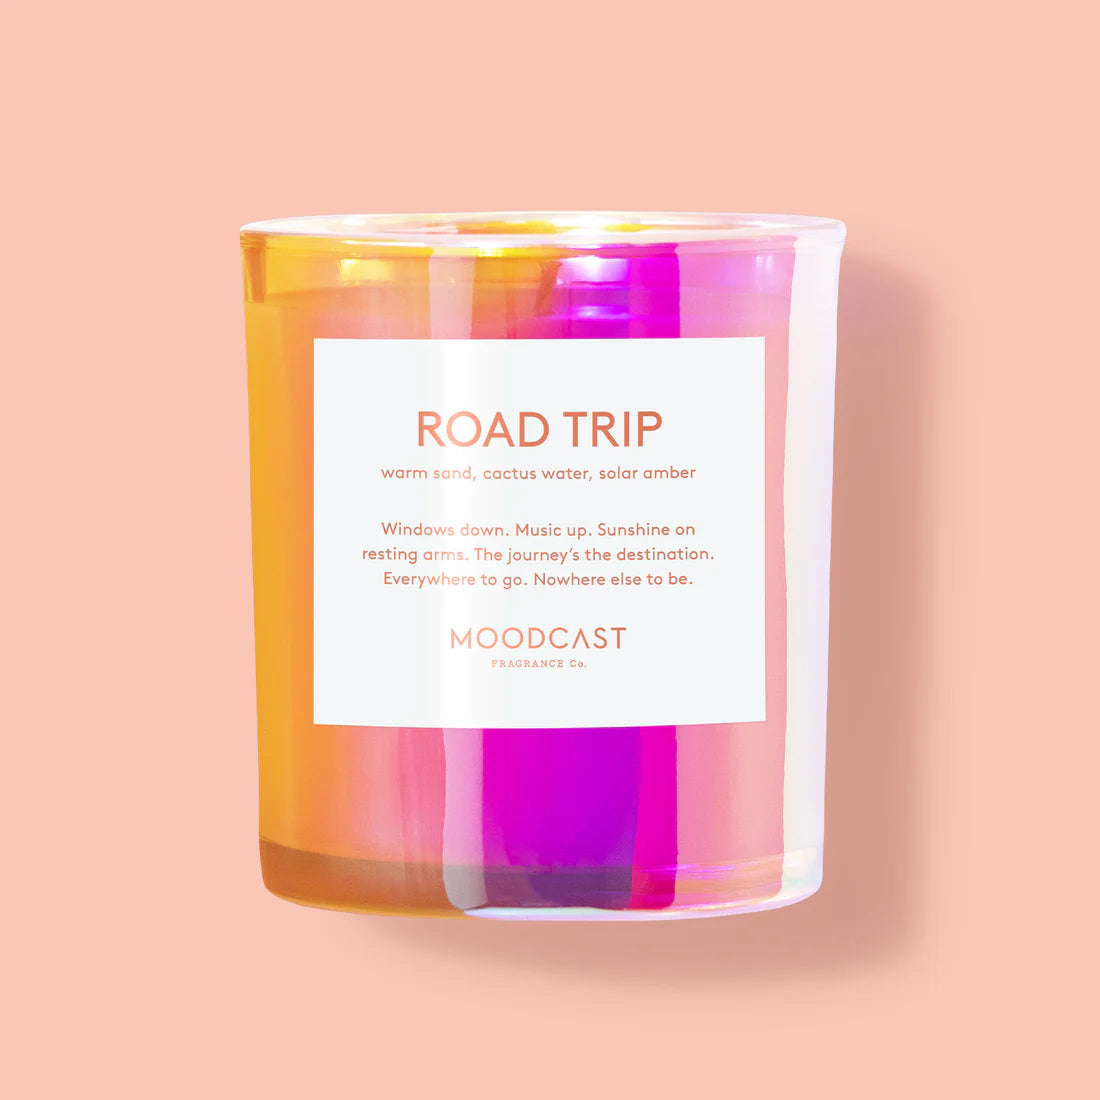 Moodcast Candle Iridescent 8oz Candles in Road Trip at Wrapsody